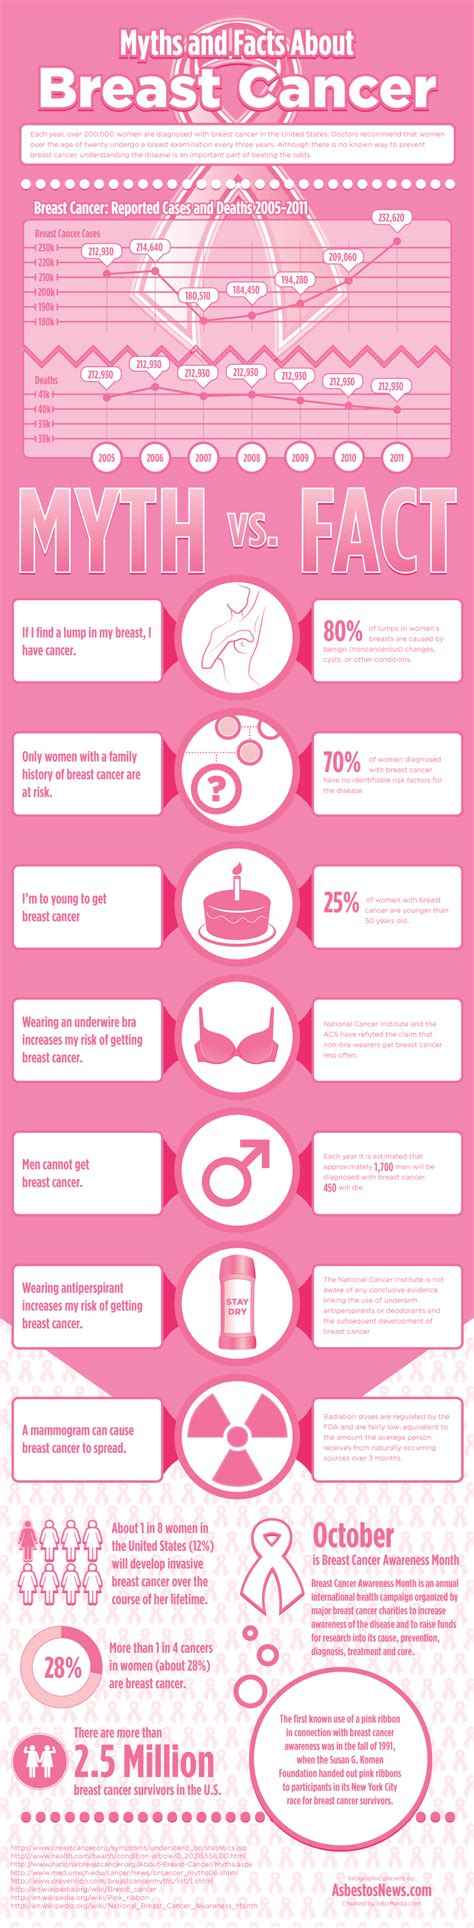 Myths And Facts About Breast Cancer Infographic Infographic List